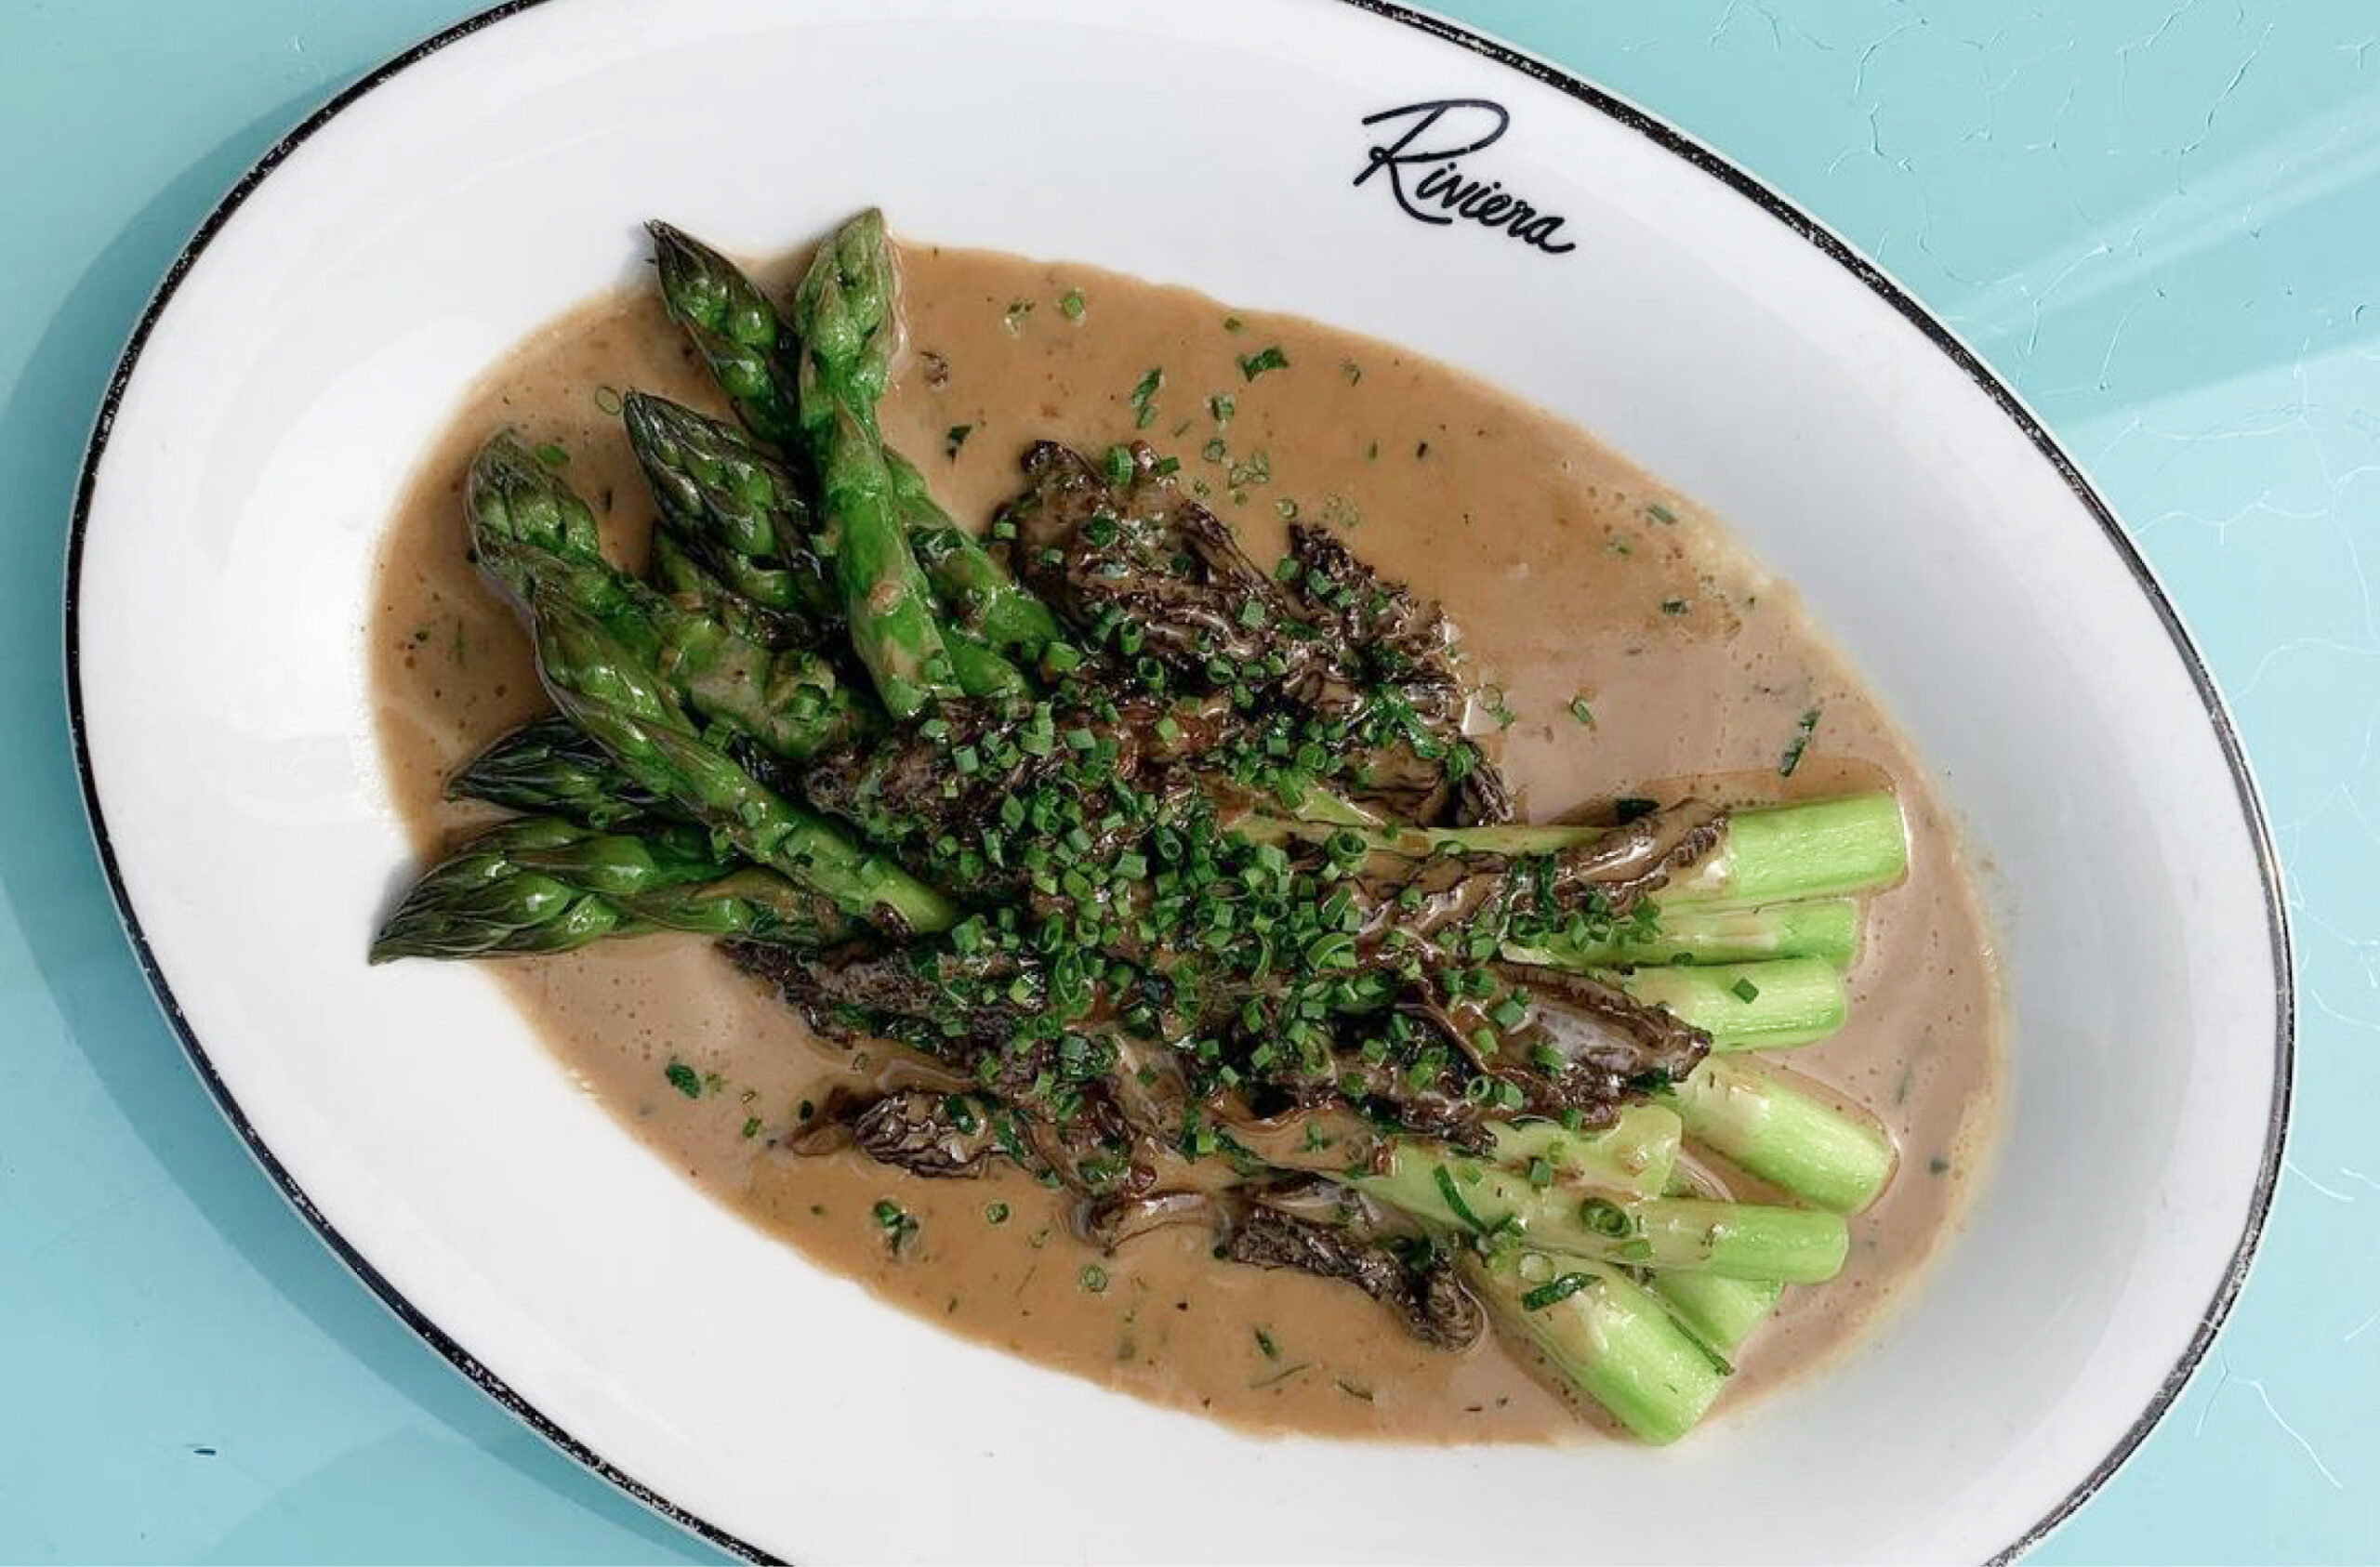 Riviera branded oval plate with asparagus. 